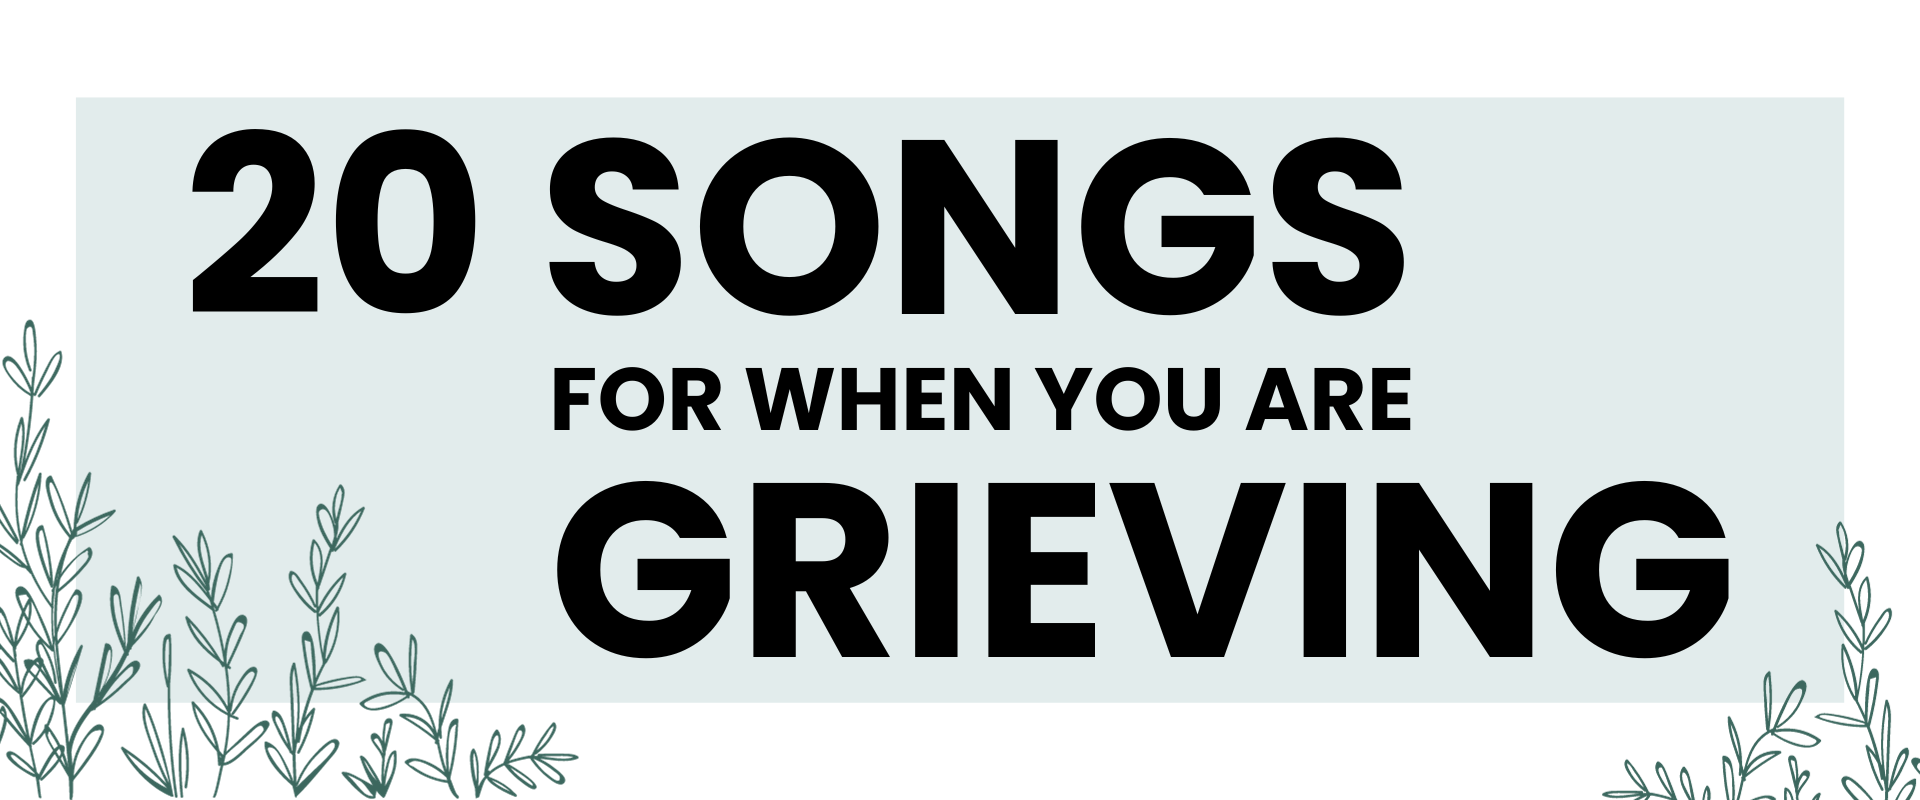 20 Songs For When You Are Grieving